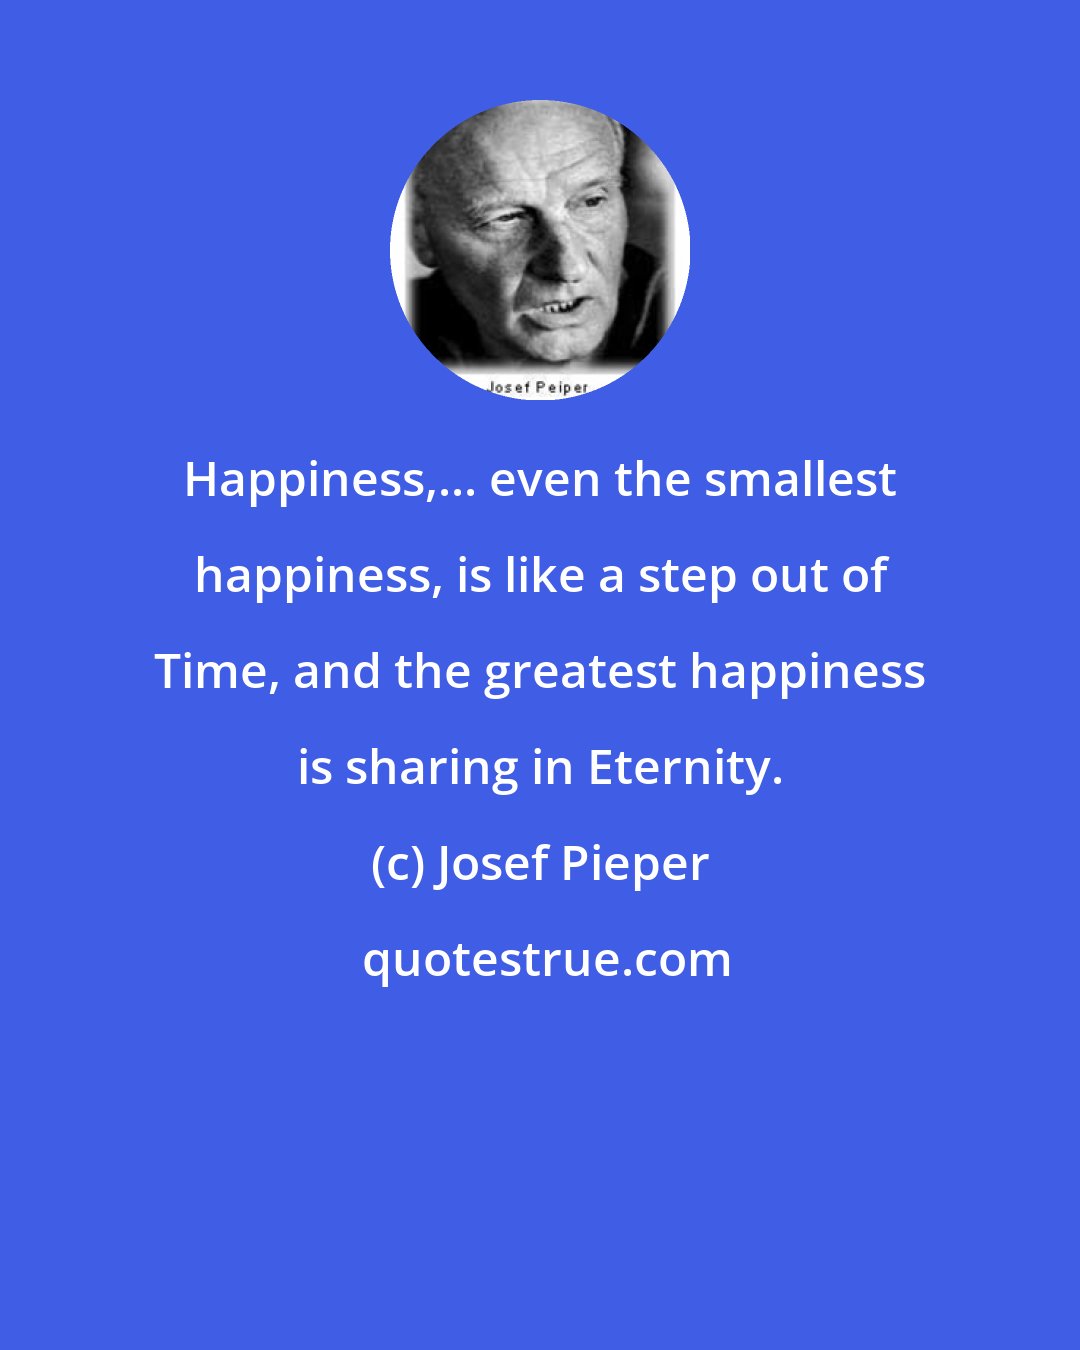 Josef Pieper: Happiness,... even the smallest happiness, is like a step out of Time, and the greatest happiness is sharing in Eternity.